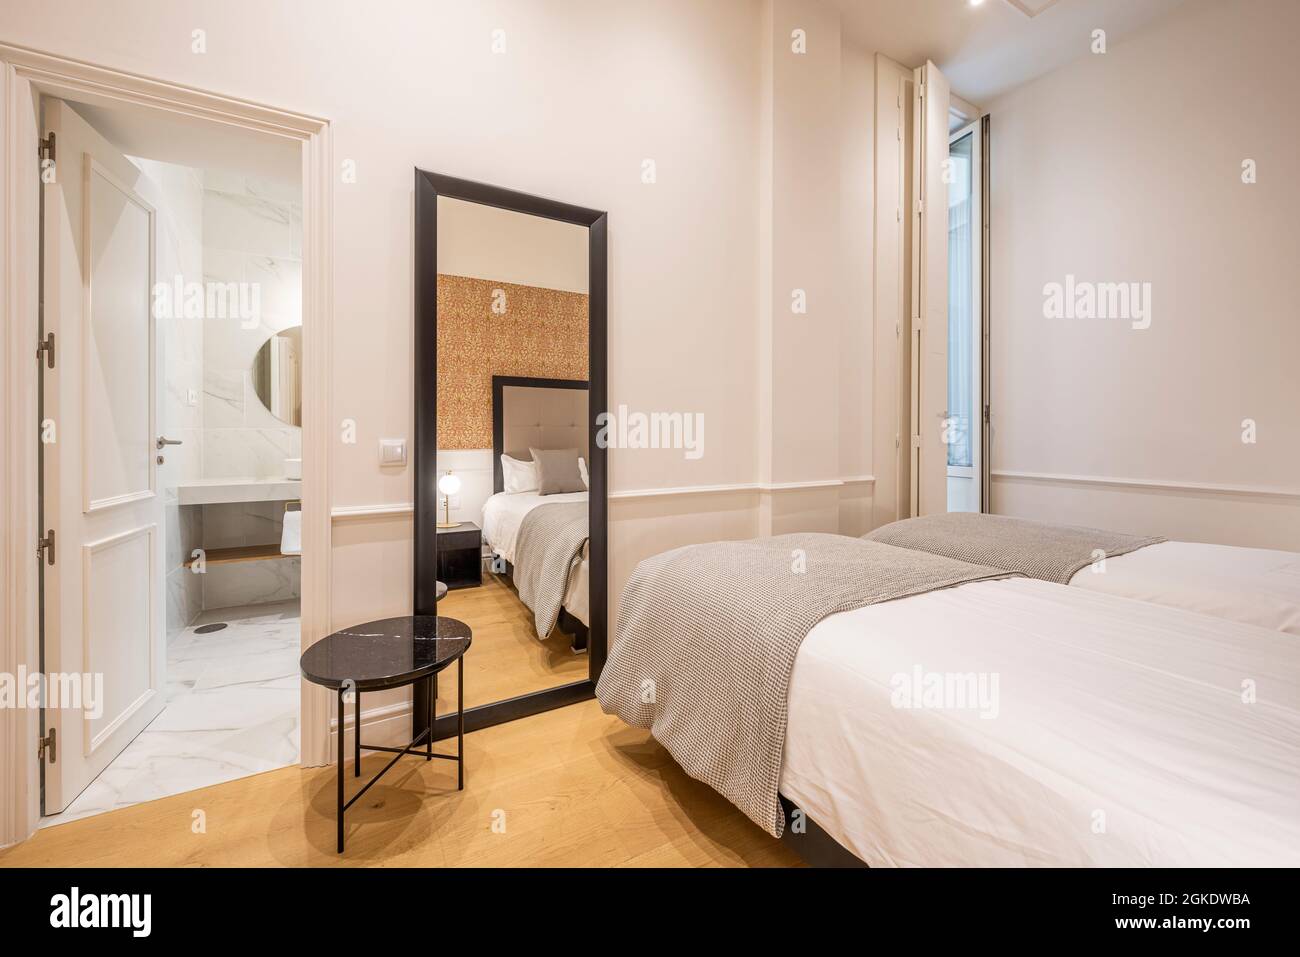 Room for two people with two beds, full-length mirror and en-suite bathroom with marble floors Stock Photo